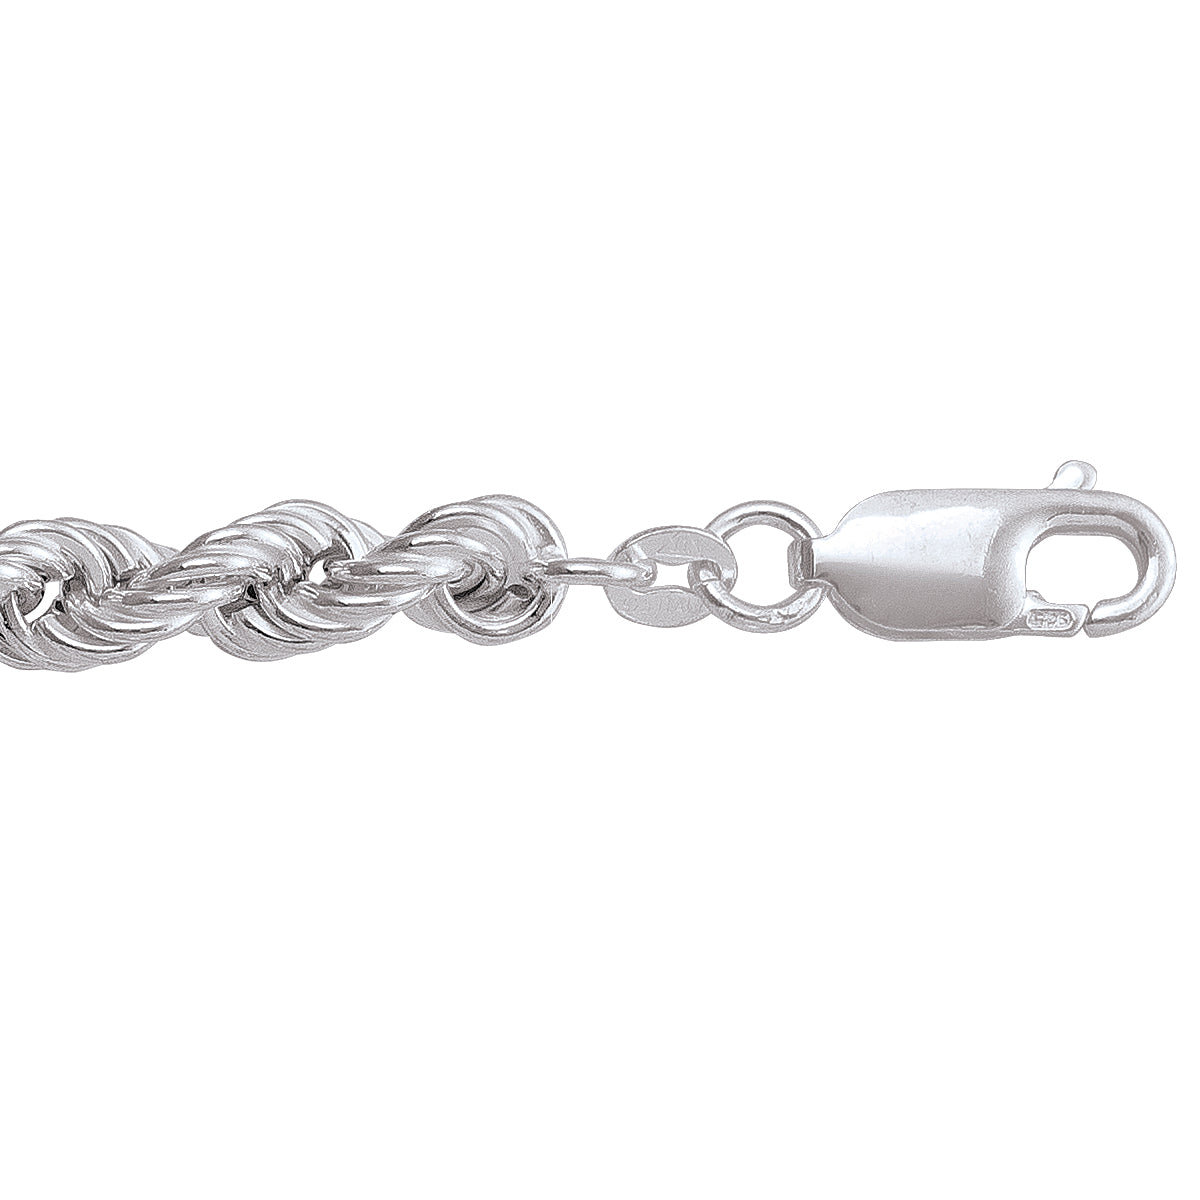 BRACELETS SILVER HOLLOW ROPE LINK CHAIN